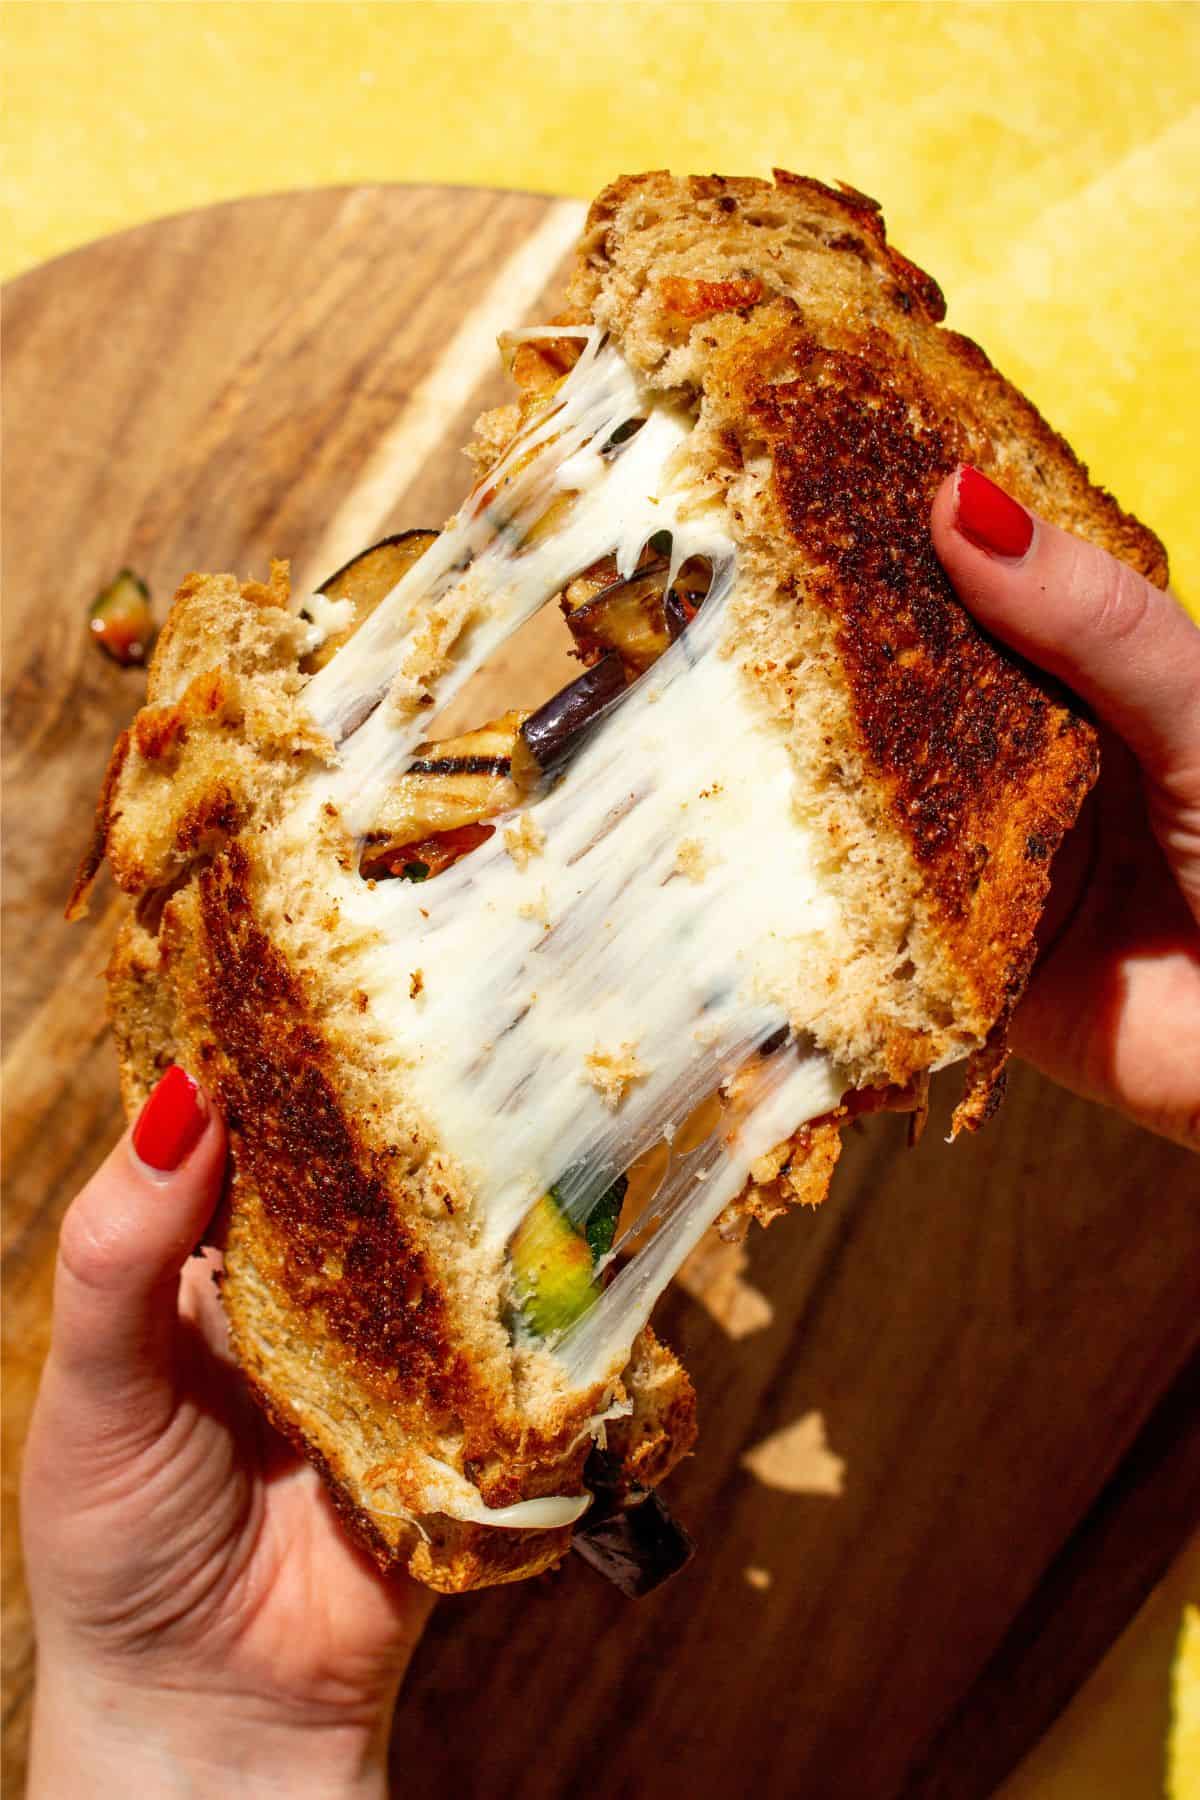 Pulling sandwich apart with 2 hands showing mozzarella cheese pull.